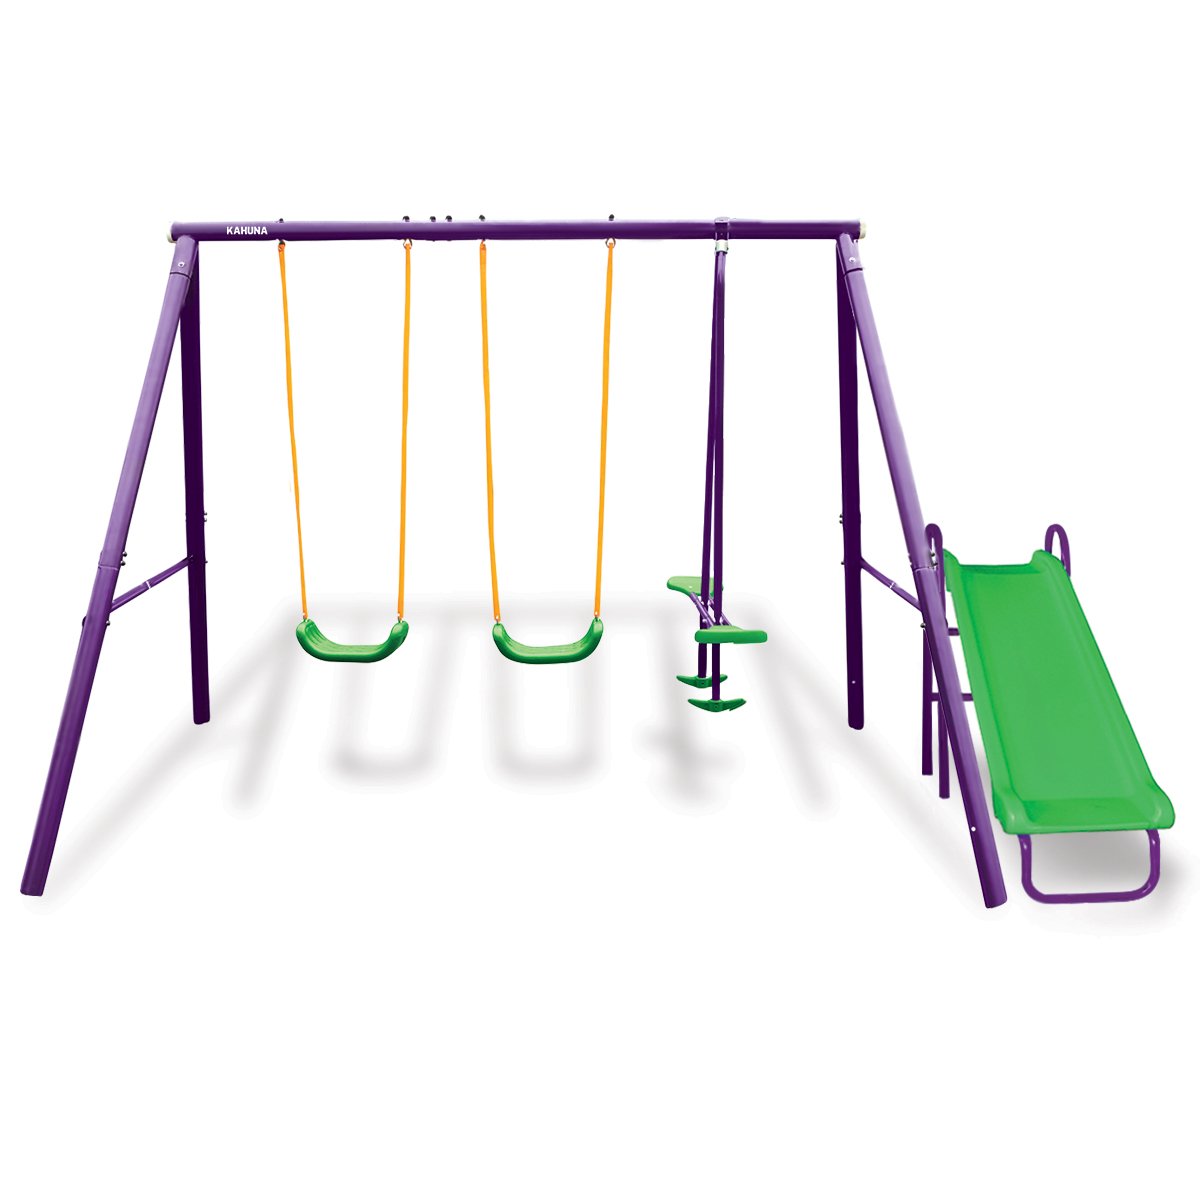 4-Seater Swing Set with Slide | Purple and Green Color Combination